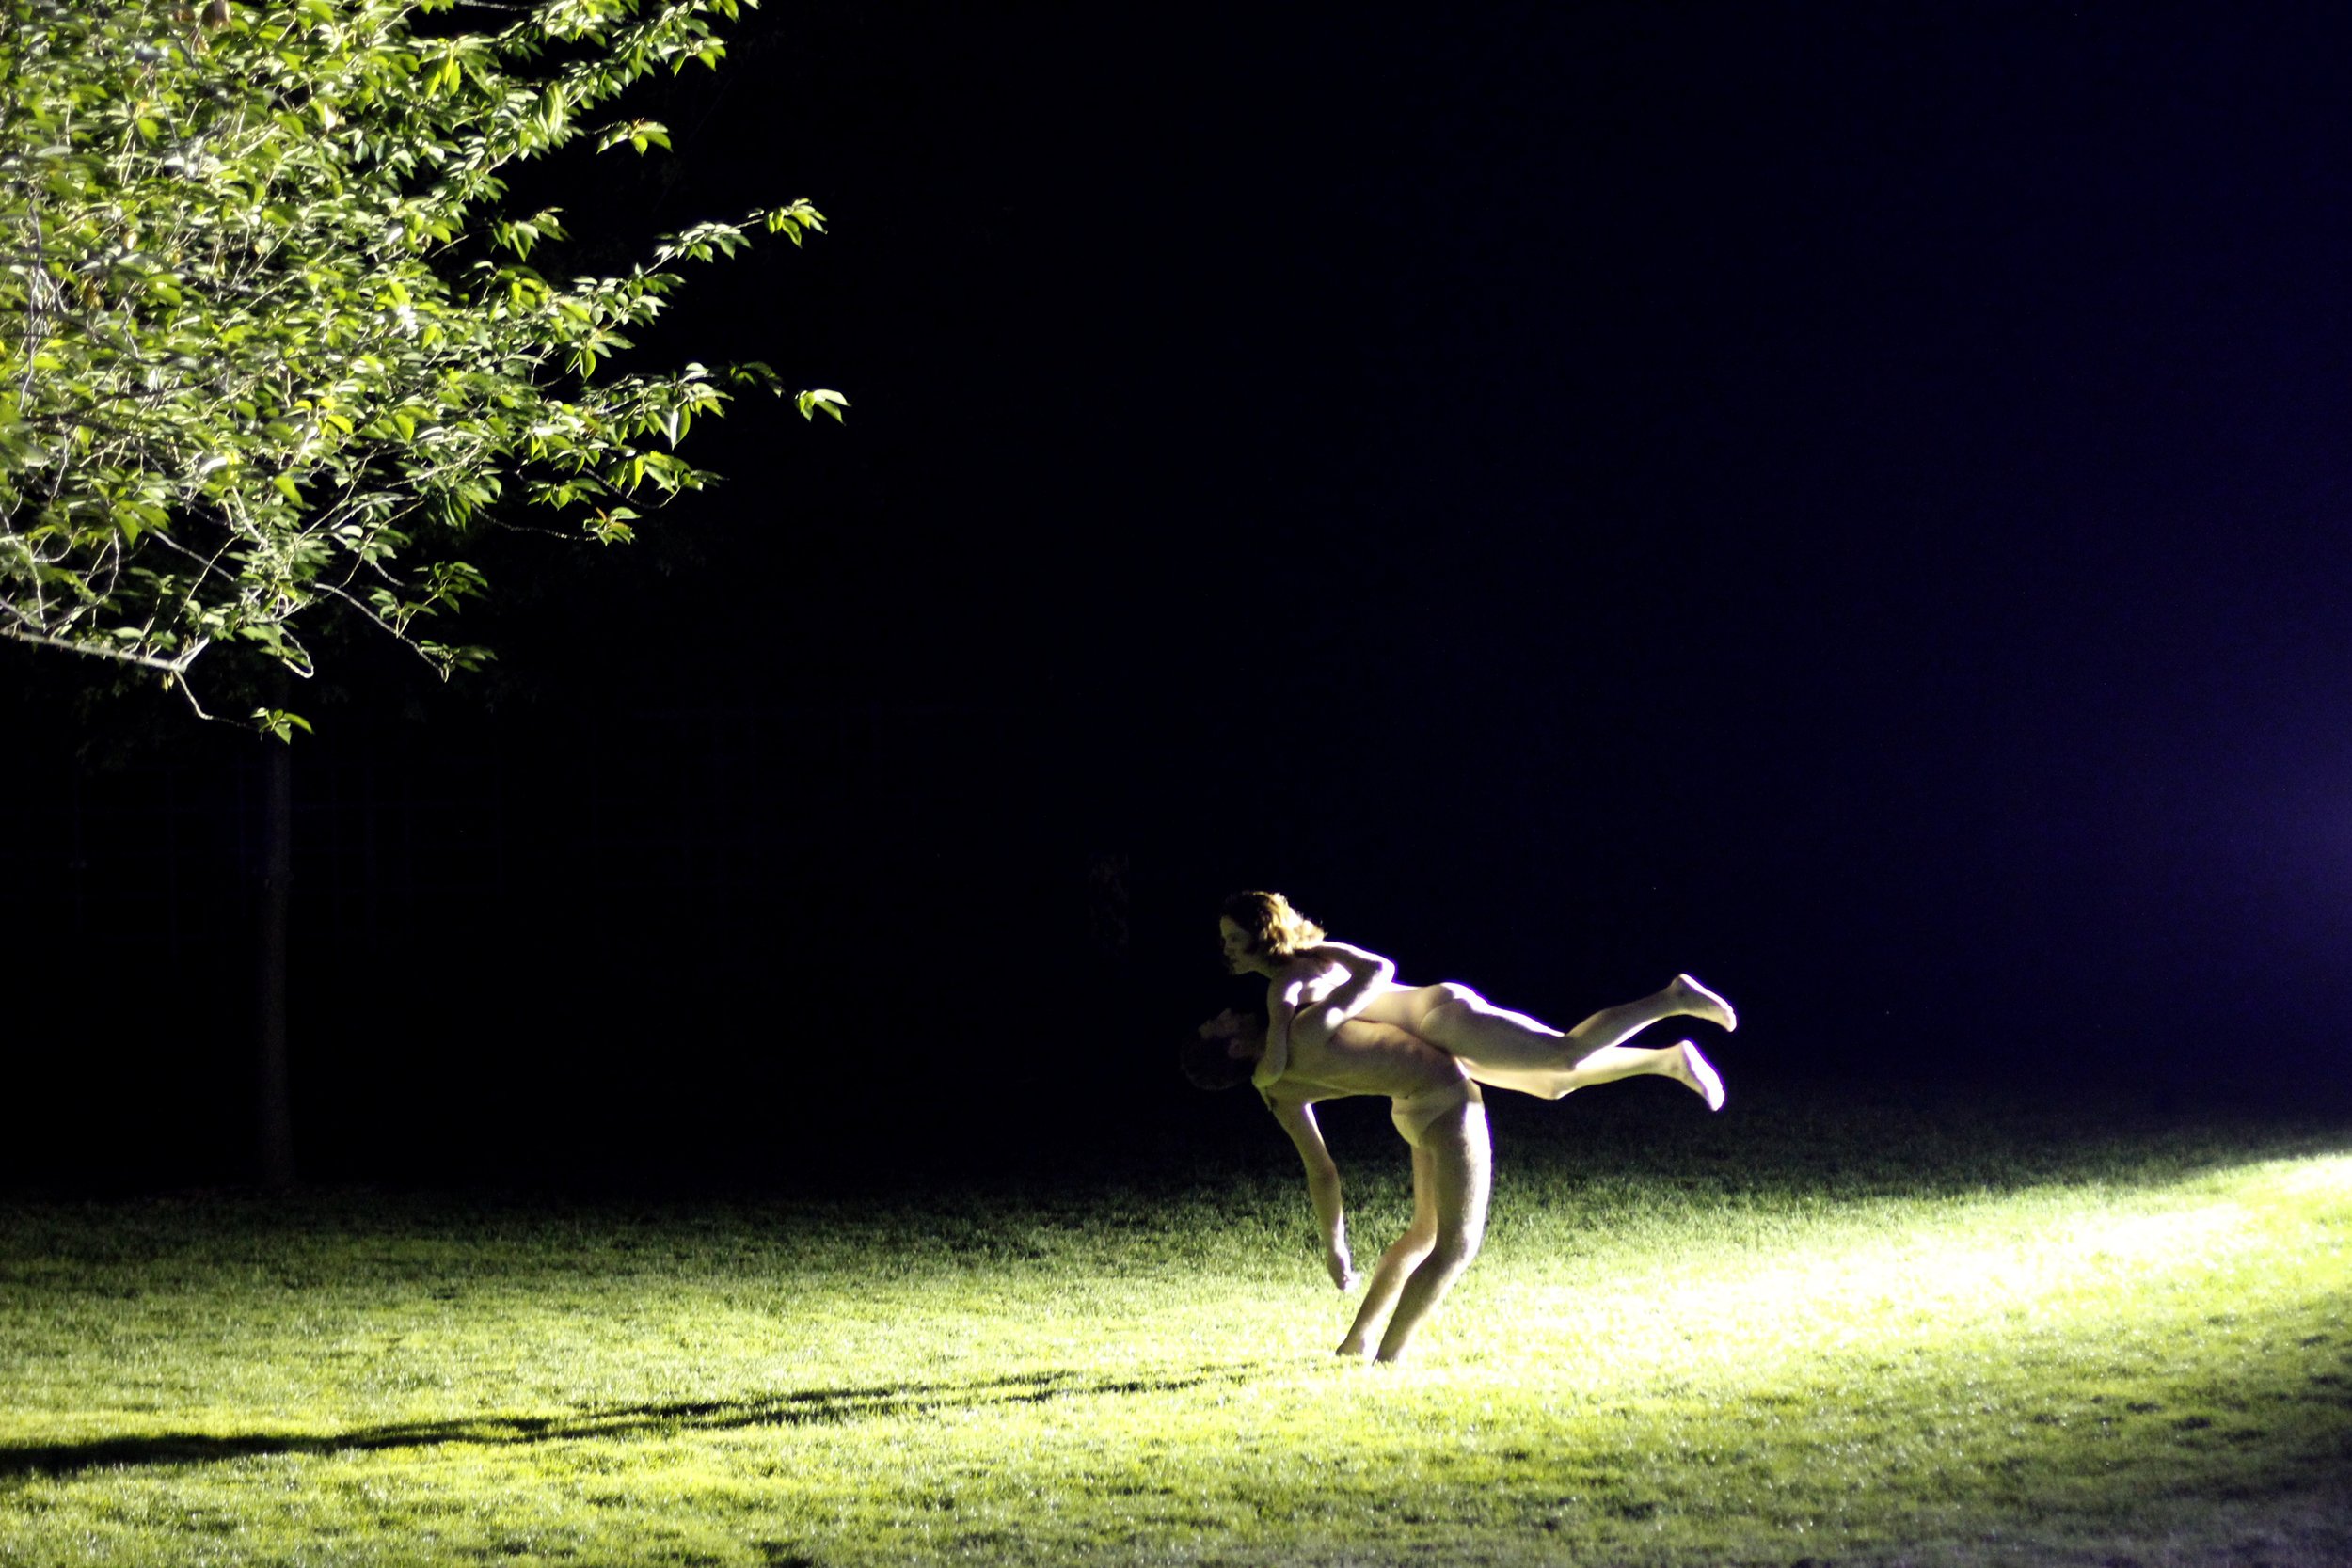 Two performers (one lifted off the ground by the other) in a stream of light on green grass. Photo by Kevin Kwan.